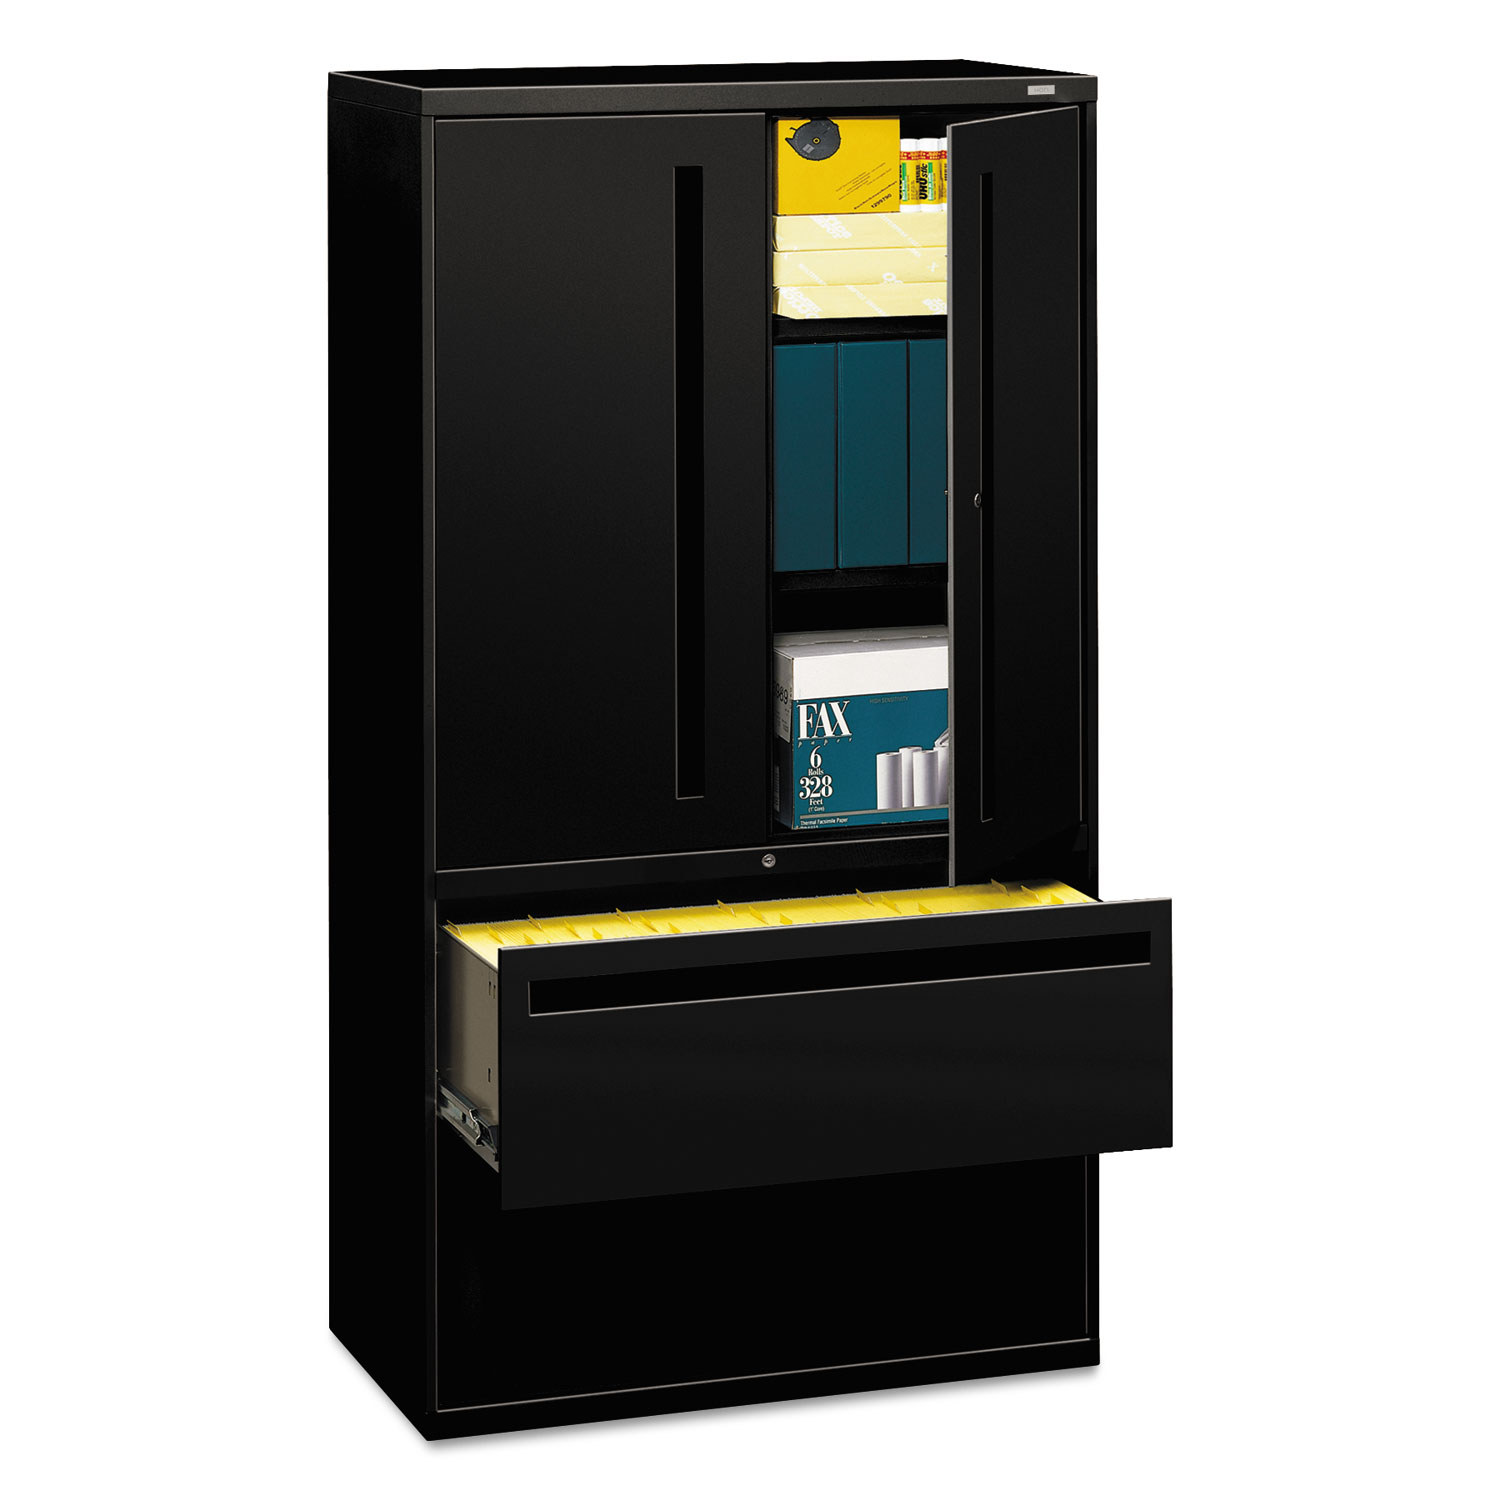  HON H785LS.L.P 700 Series Lateral File with Storage Cabinet, 36w x 18d x 64.25h, Black (HON785LSP) 